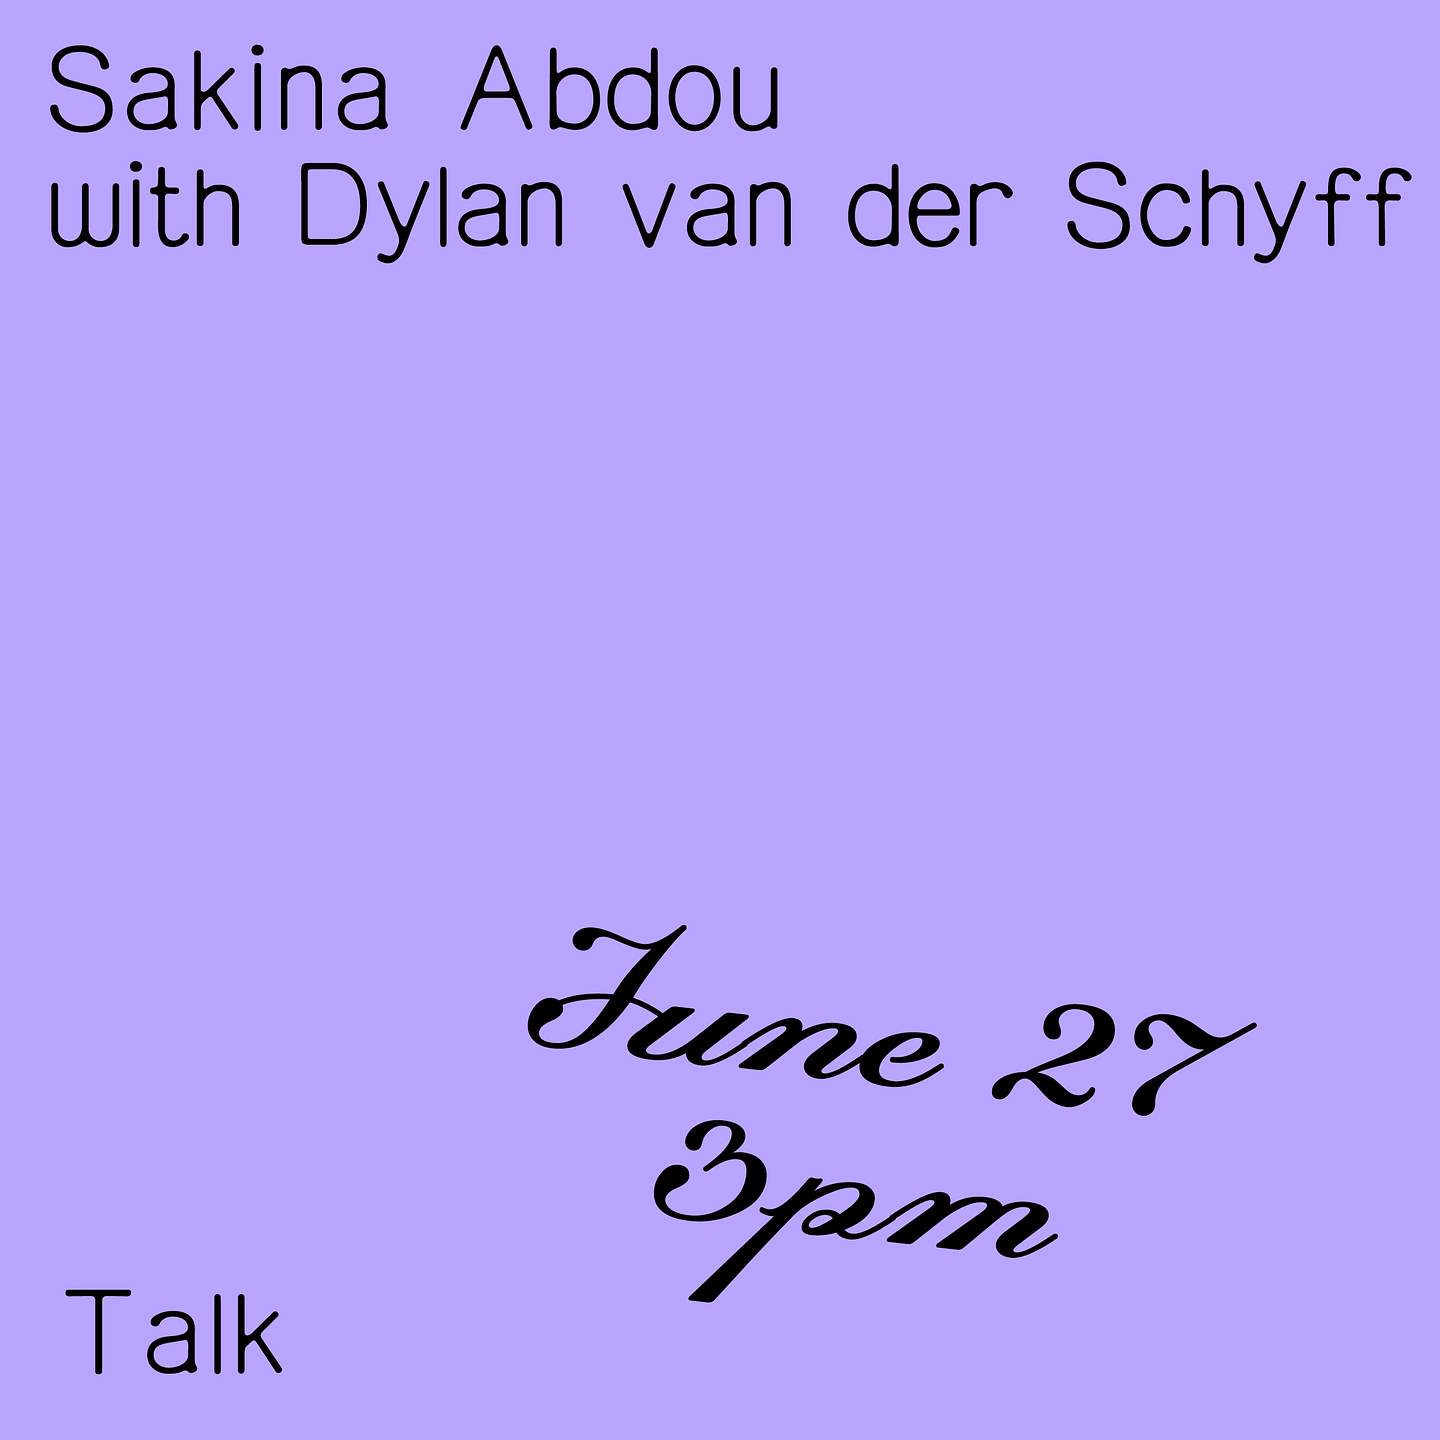 A graphic that reads "Sakina Abdou with Dylan van der Schyff. June 27 3pm. Talk." in a black script font on a lilac background.